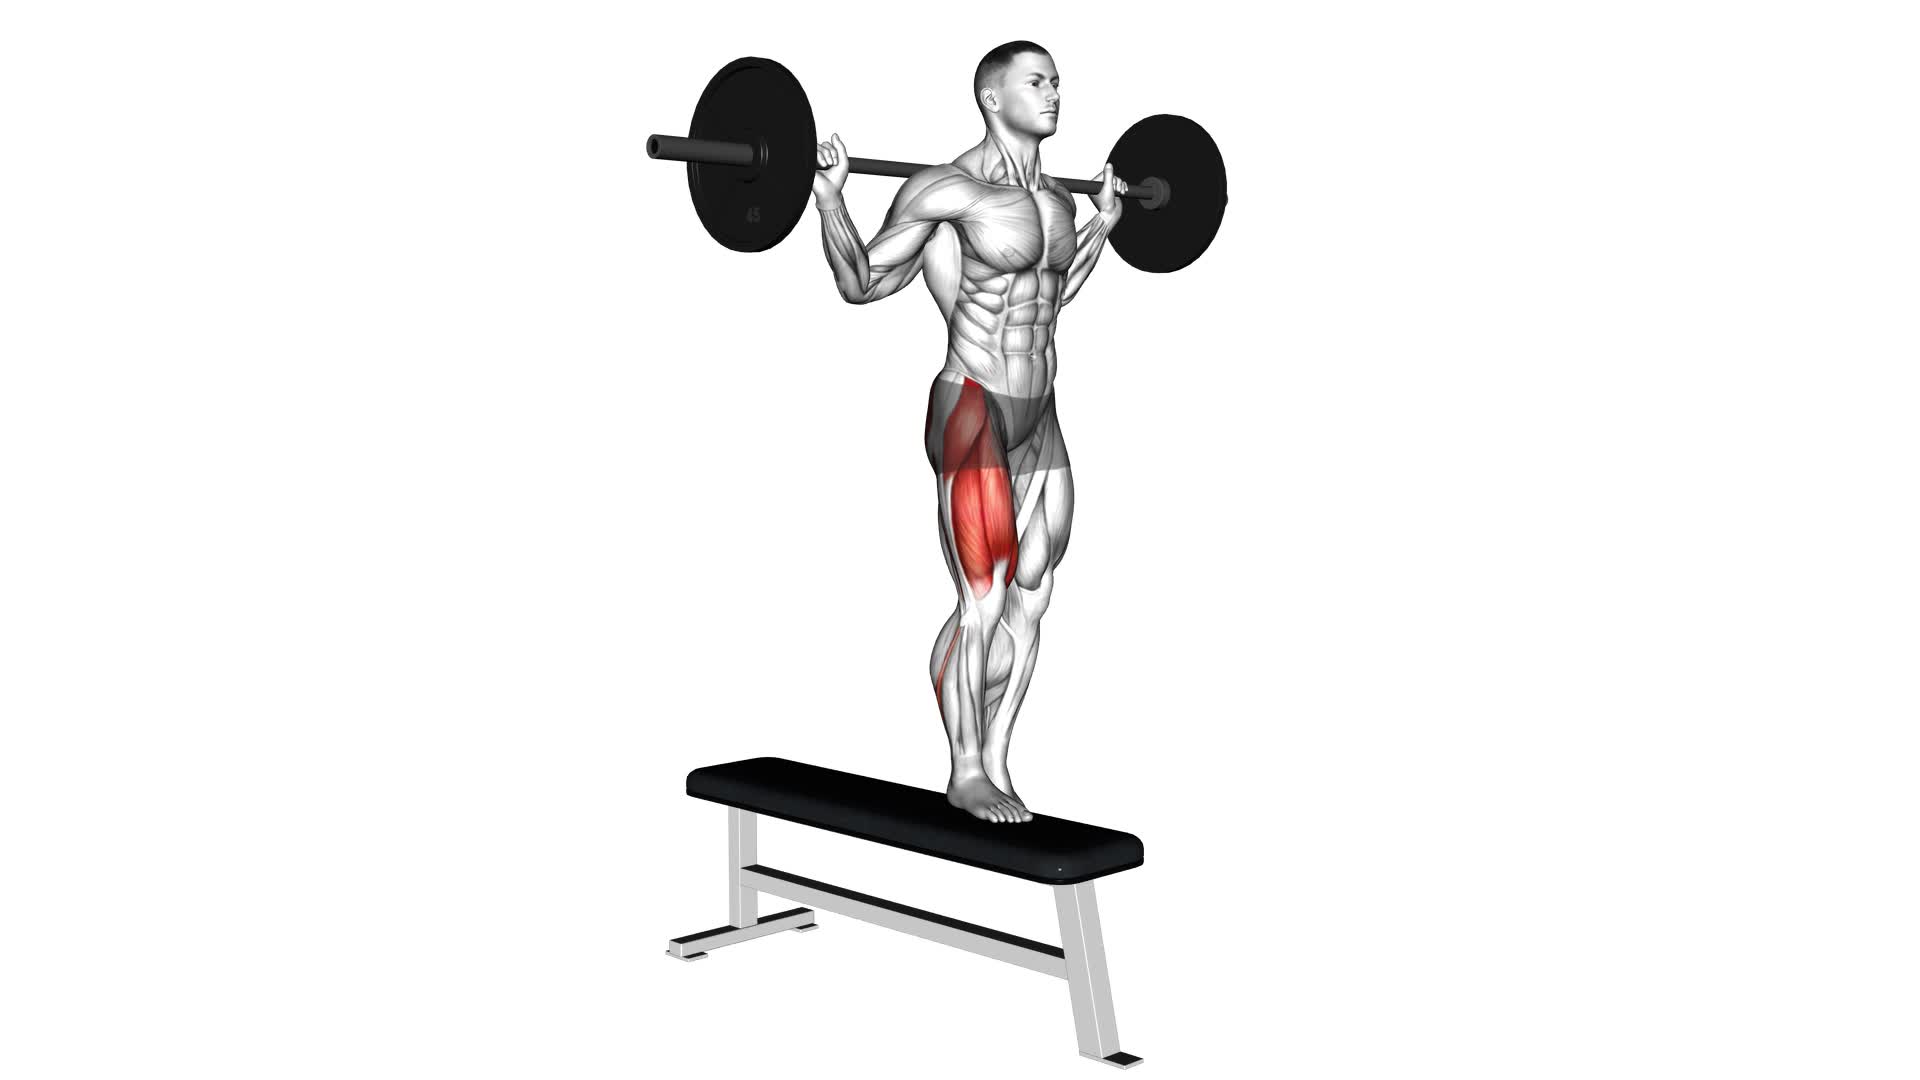 Barbell Bench Lateral Step-up (male) - Video Exercise Guide & Tips